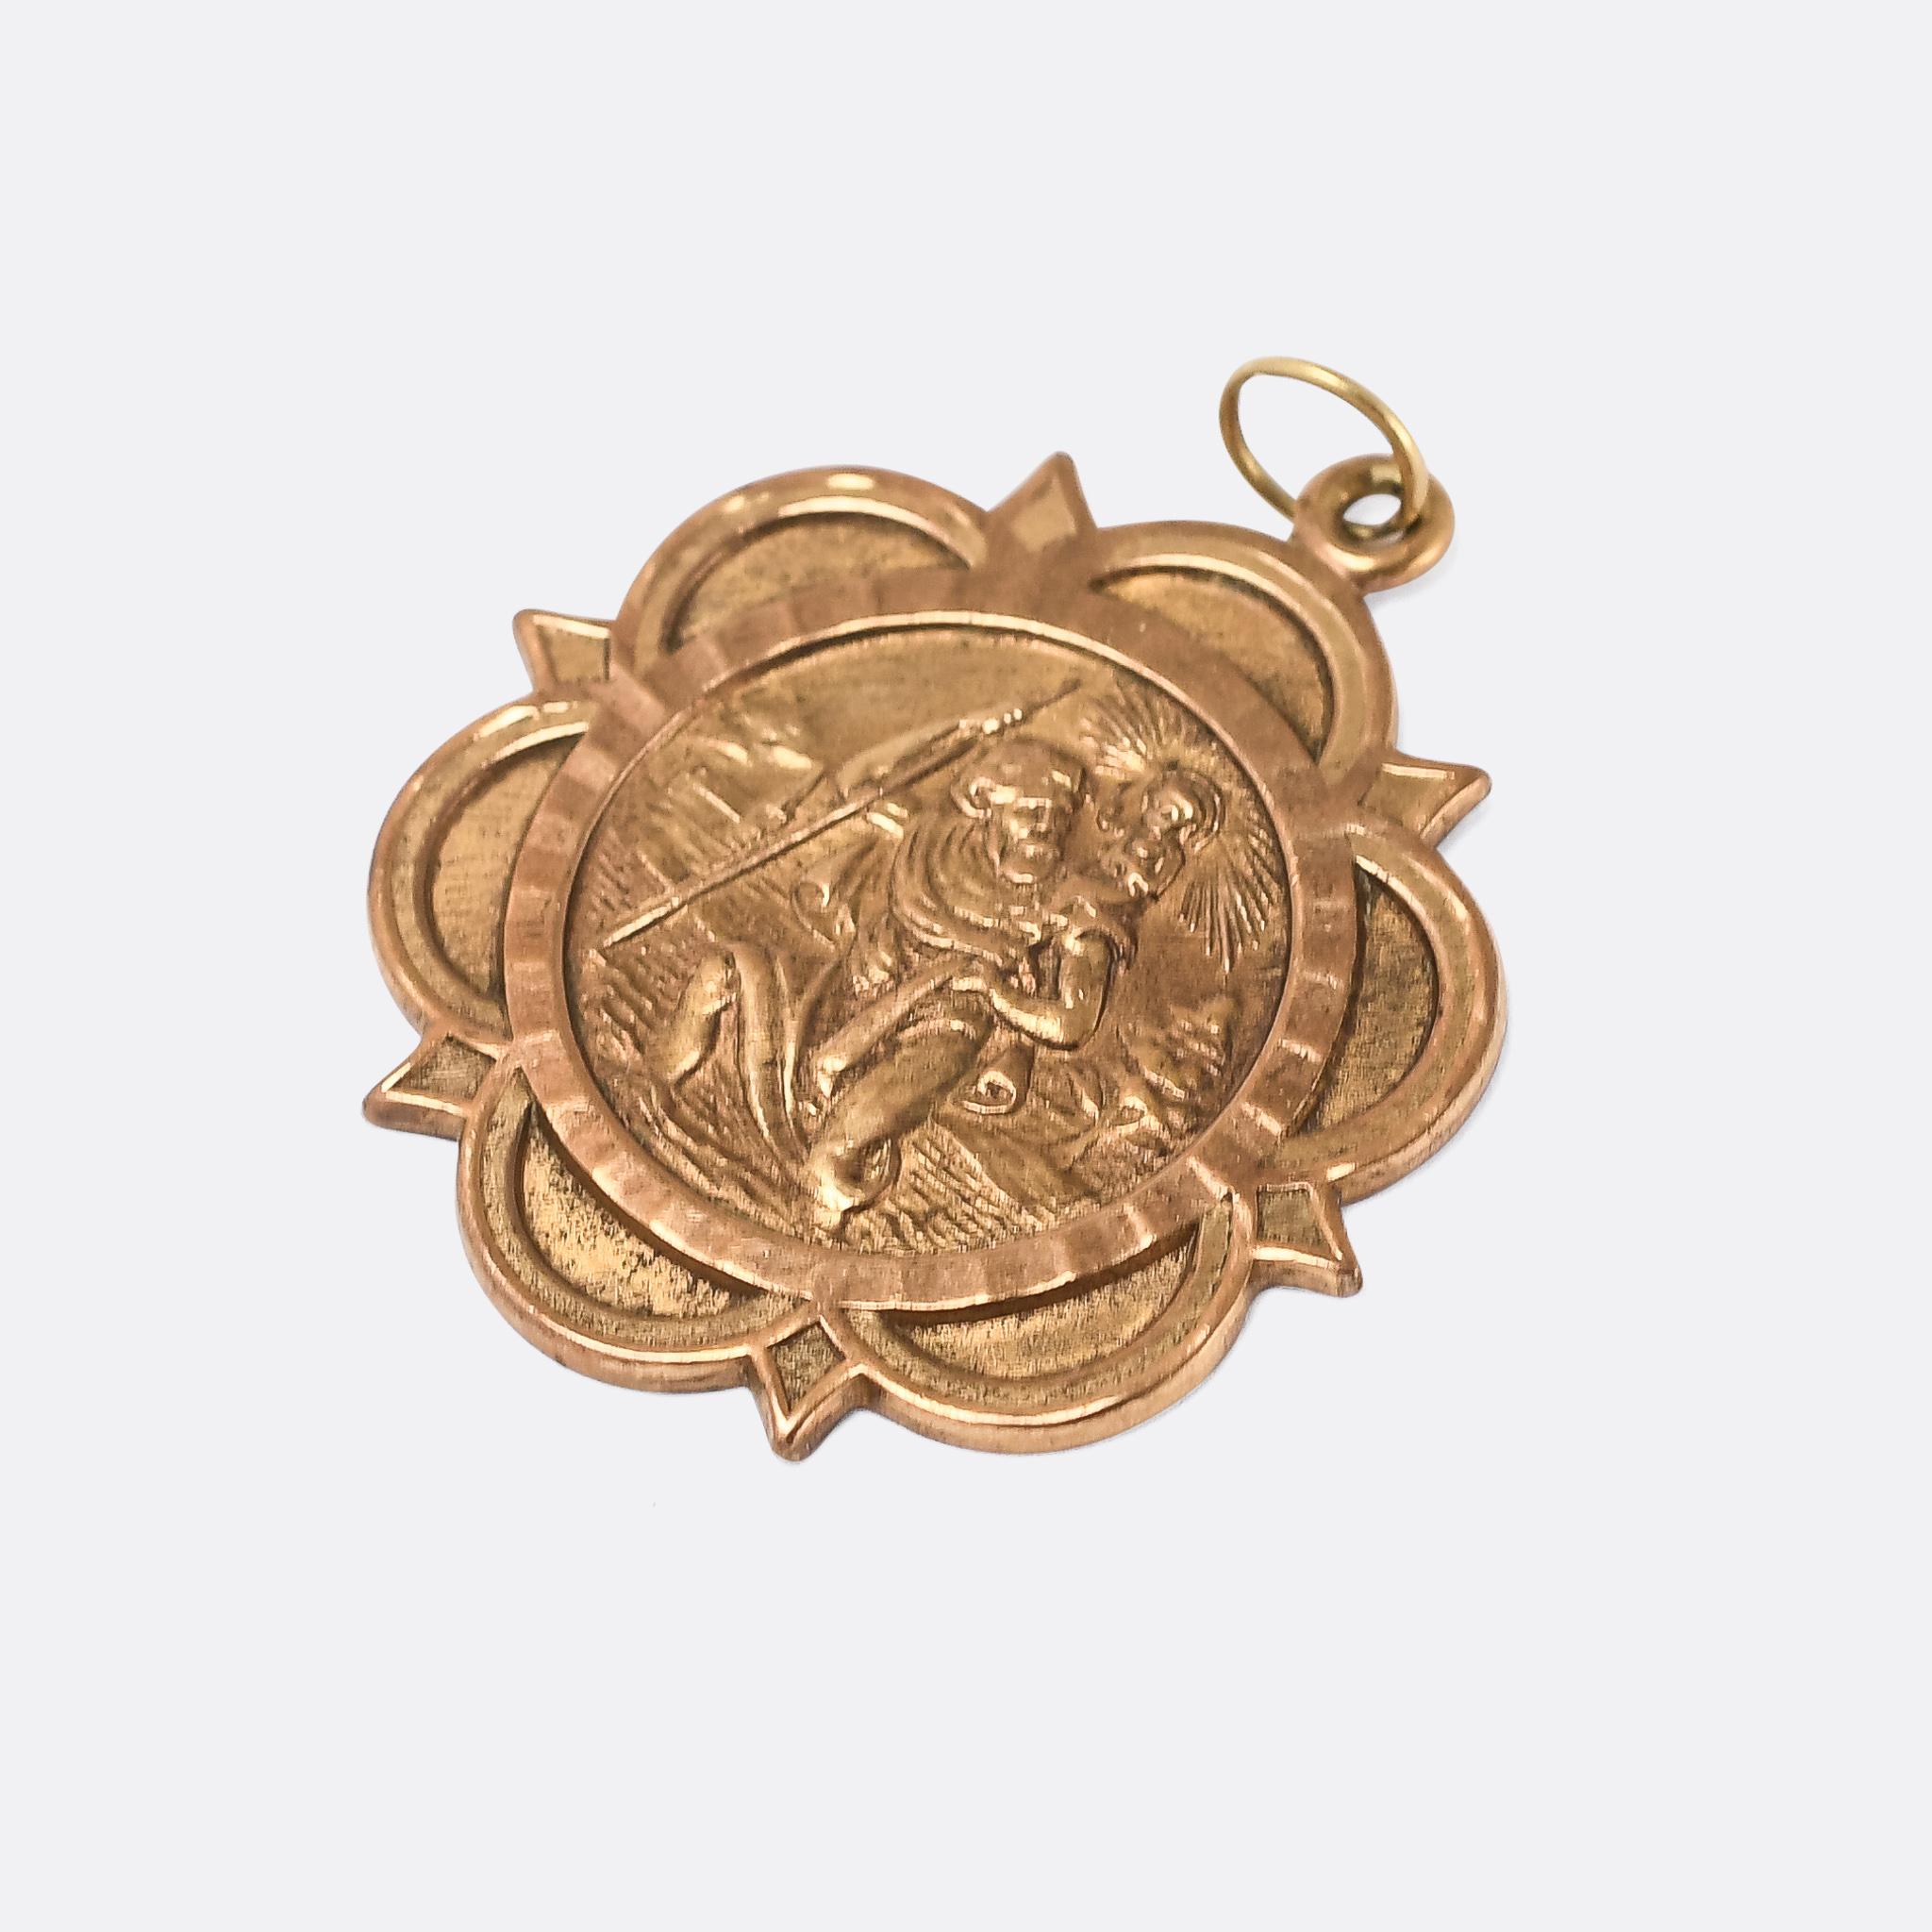 A particularly high quality vintage St Christopher pendant in 9k gold. It's a good size at 3cm diameter, with London hallmarks dating it to the year 1975.

MEASUREMENTS 
3.3 x 3.0cm

WEIGHT 
7.5g

MARKS 
English hallmarks for 9k gold, London 1975